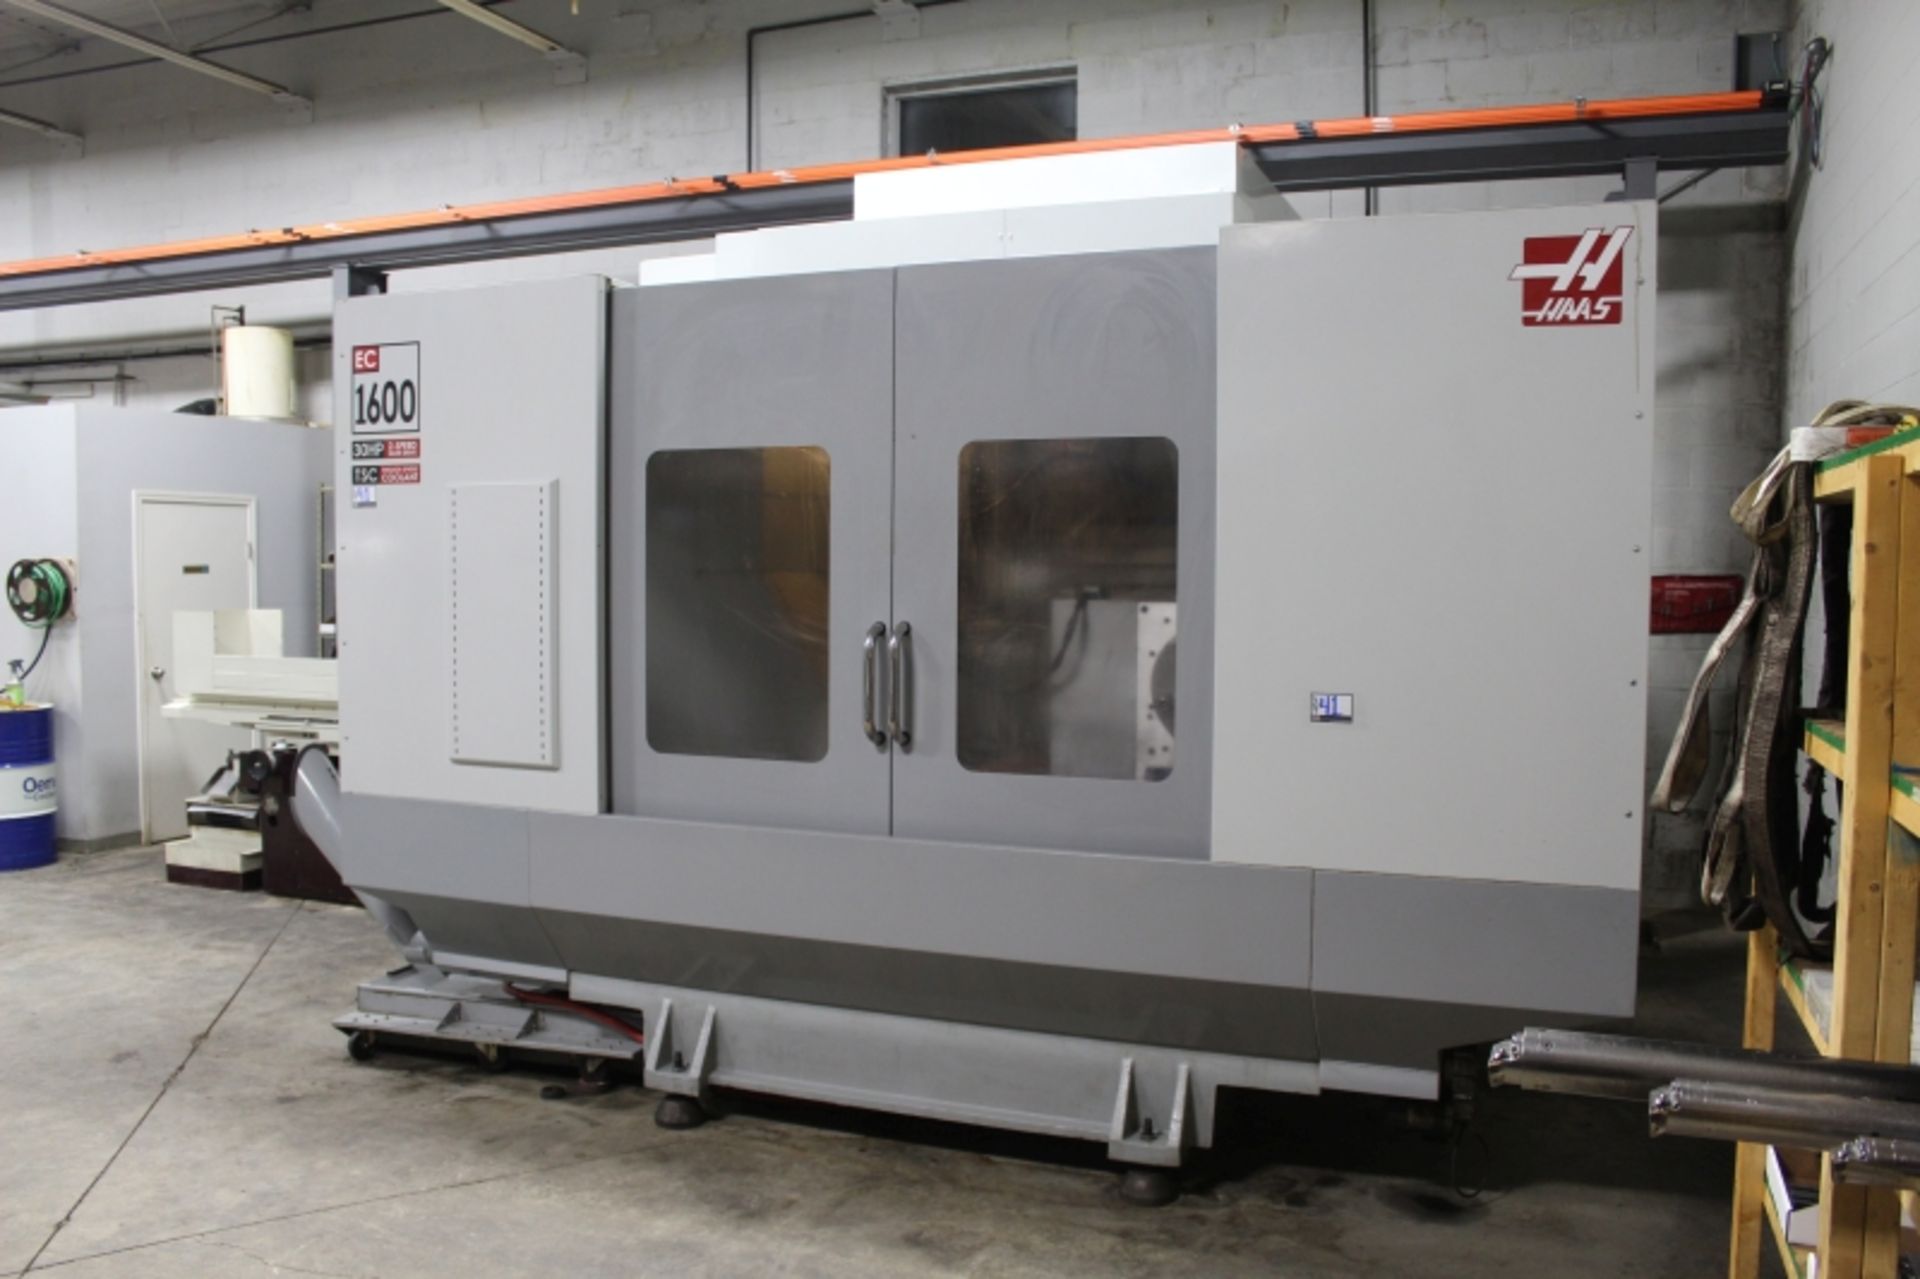 Haas EC-1600-4X, 5-Axis, 64” x 50” x 32” trvls, 7500 RPM, CT50, 30 ATC, CTS, S/N 2052737, New - Image 4 of 13